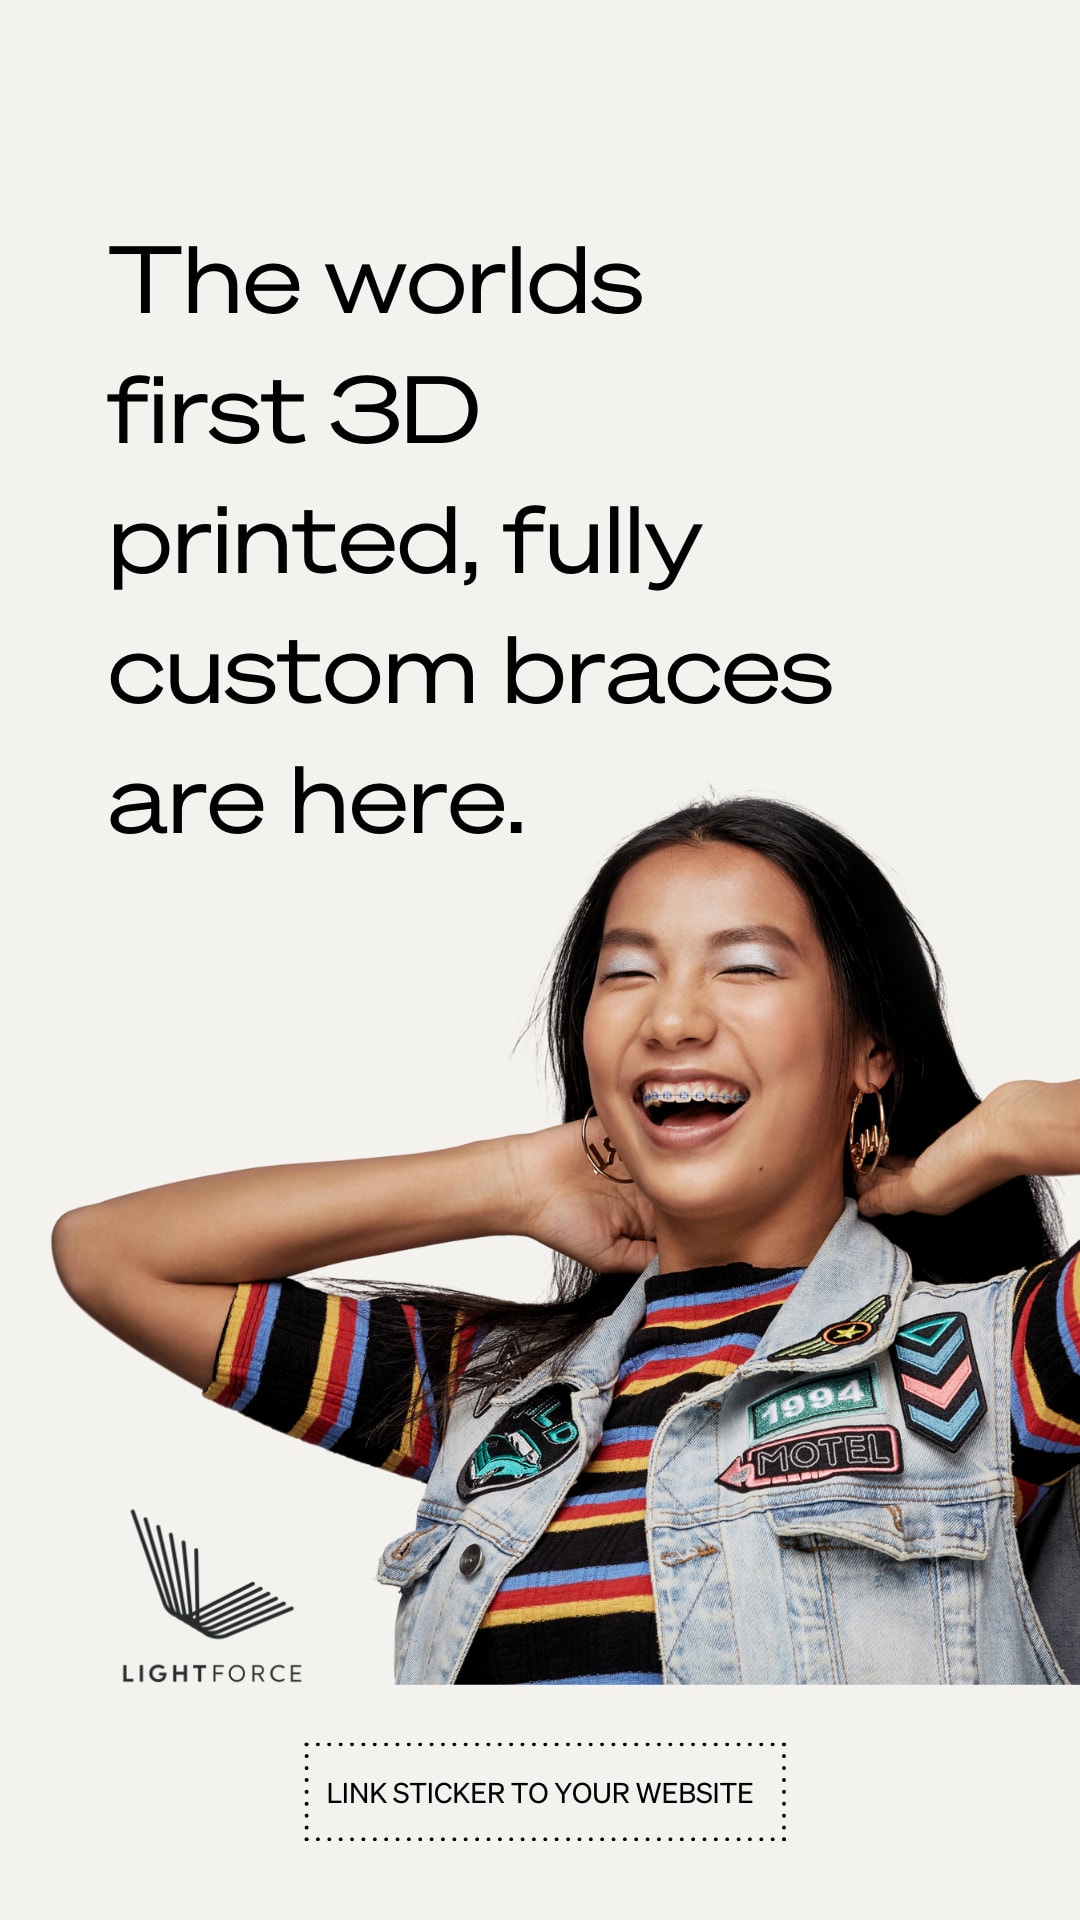 The worlds first 3 D printed fully custom braces are here Instagram Story 2